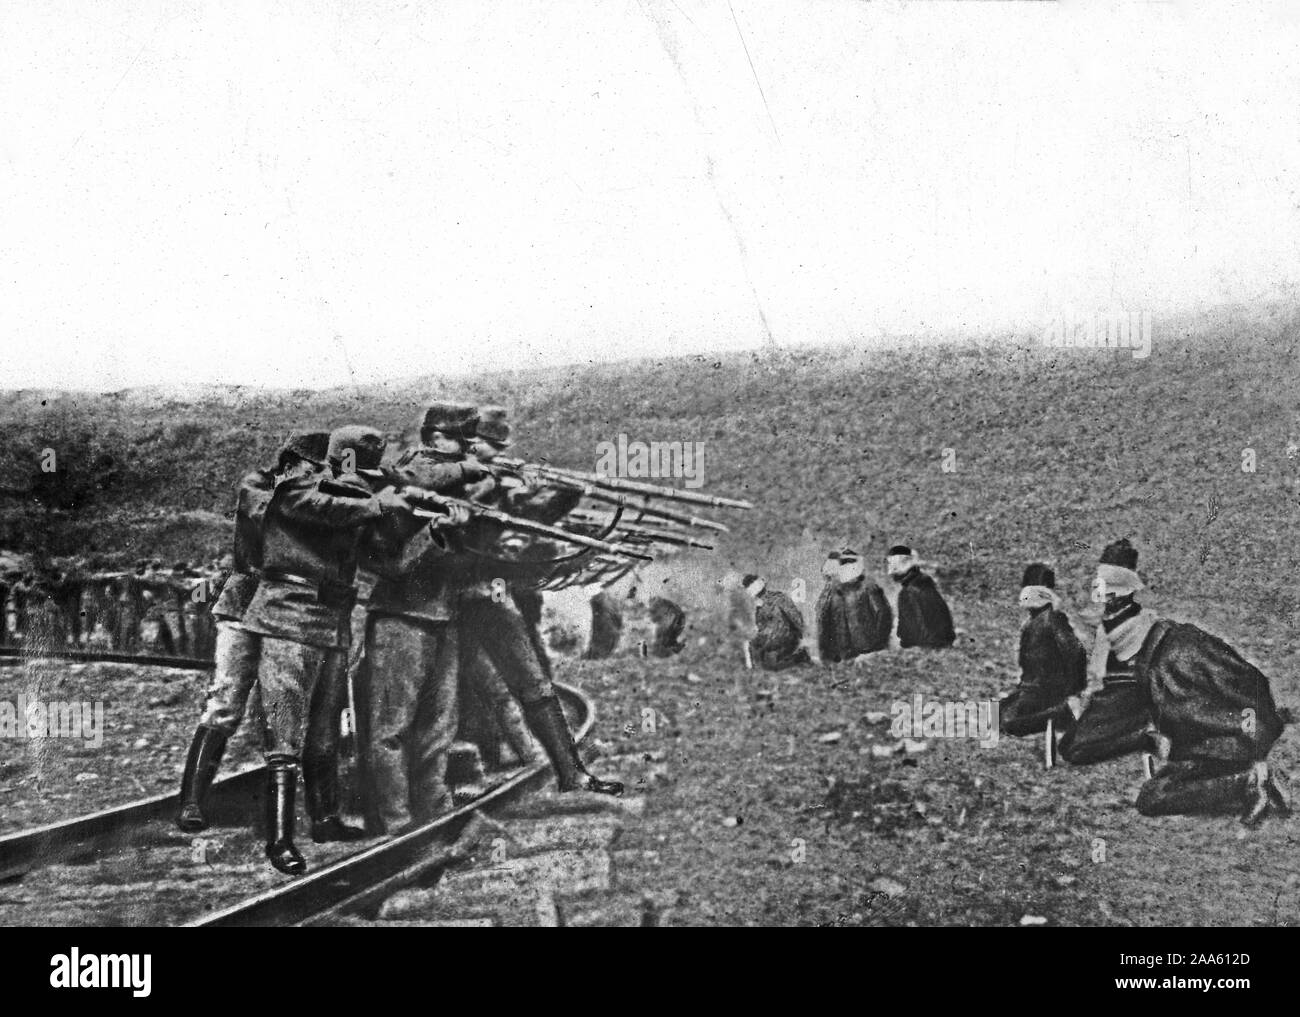 Austrian's Atrocities. Blindfolded and in kneeling position, patriotic Jugo-Slavs in Serbia near the Austrian lines were arranged in a semi-circle and ruthlessly shot at a commandf ca. 1917-1918 Stock Photo